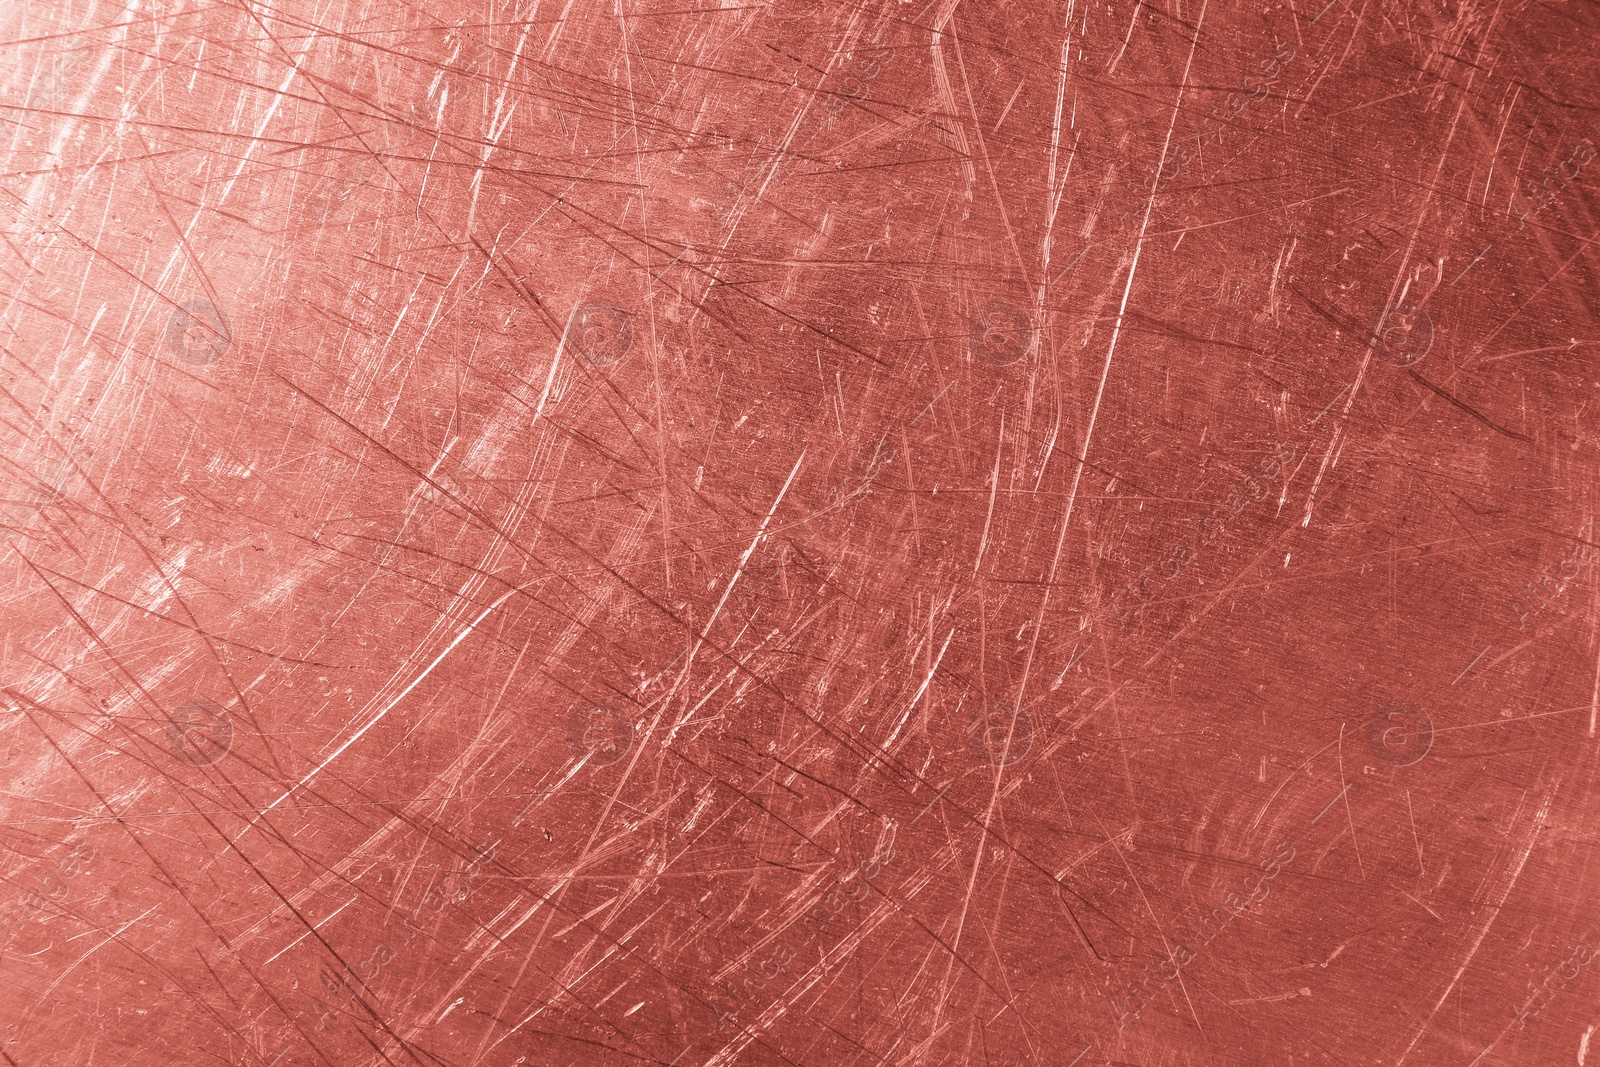 Image of Texture of rose gold metallic surface as background, closeup